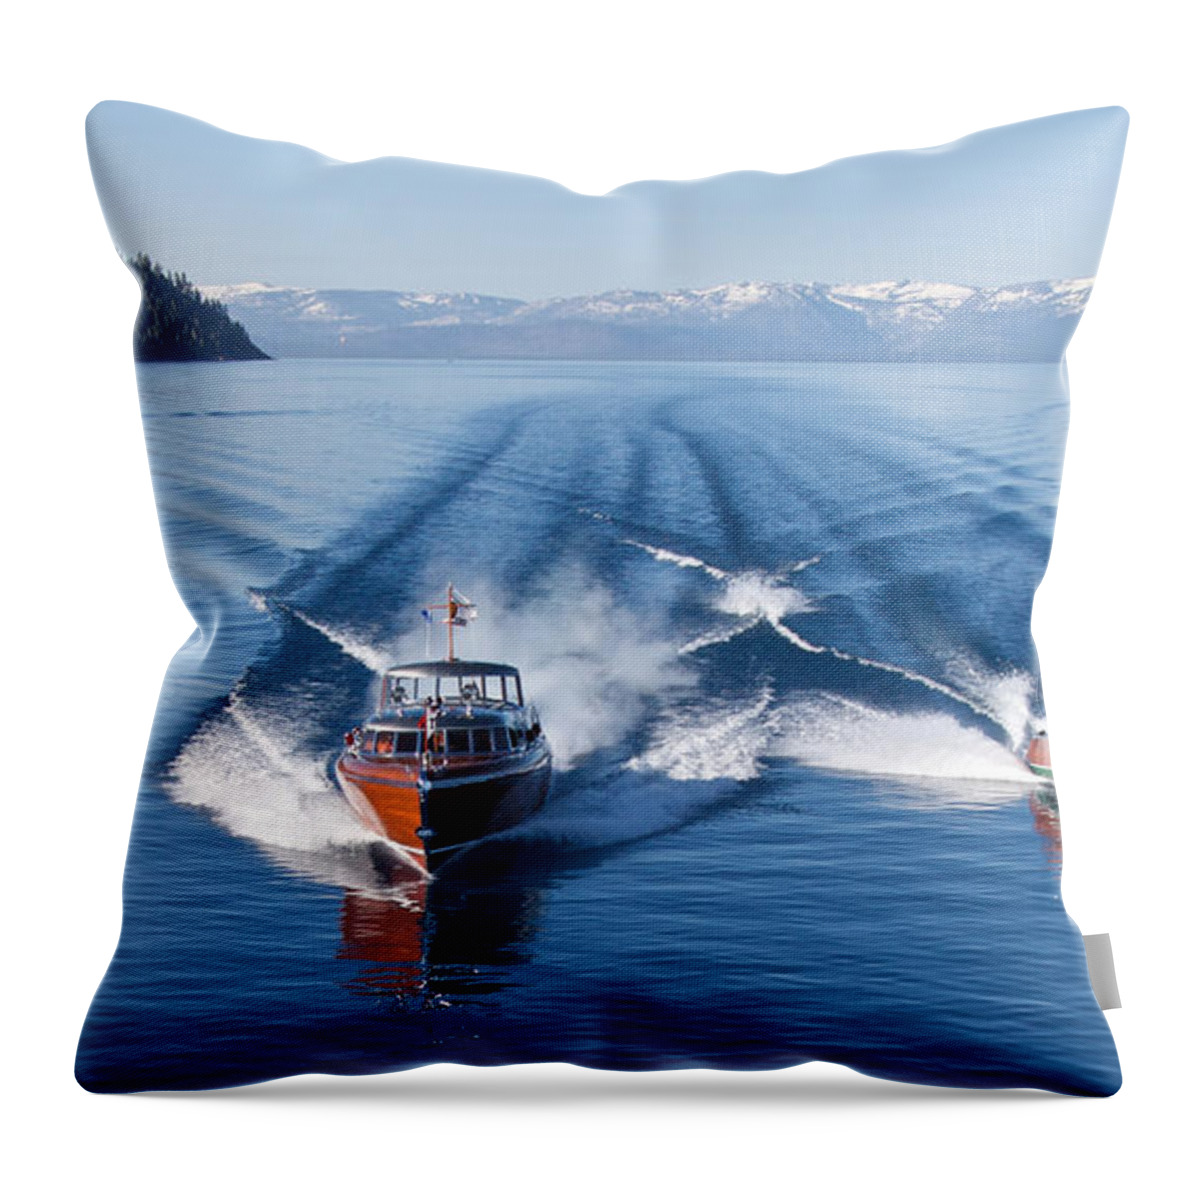 Classic Throw Pillow featuring the photograph The View Never Changes by Steven Lapkin